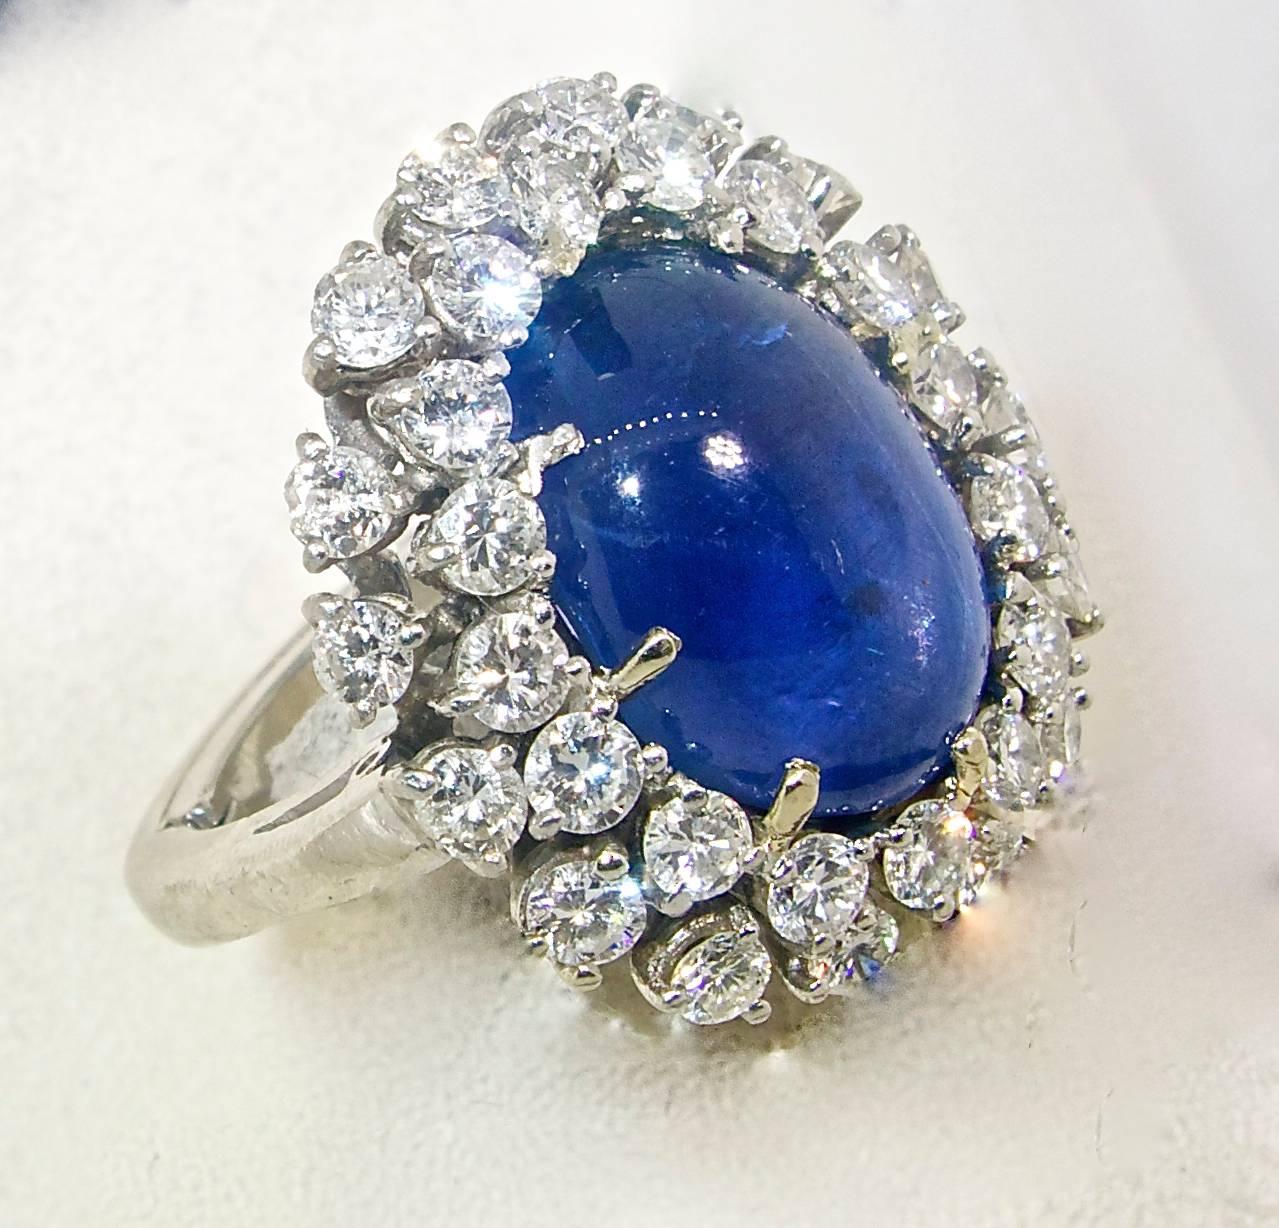 AGL has certified that this 14.27 ct fine blue natural Ceylon sapphire has not been subjected to heat and is thus entirely natural.   The sapphire is a pure bright blue with a  6 pointed star in the center..  This center stone is surrounded  by fine